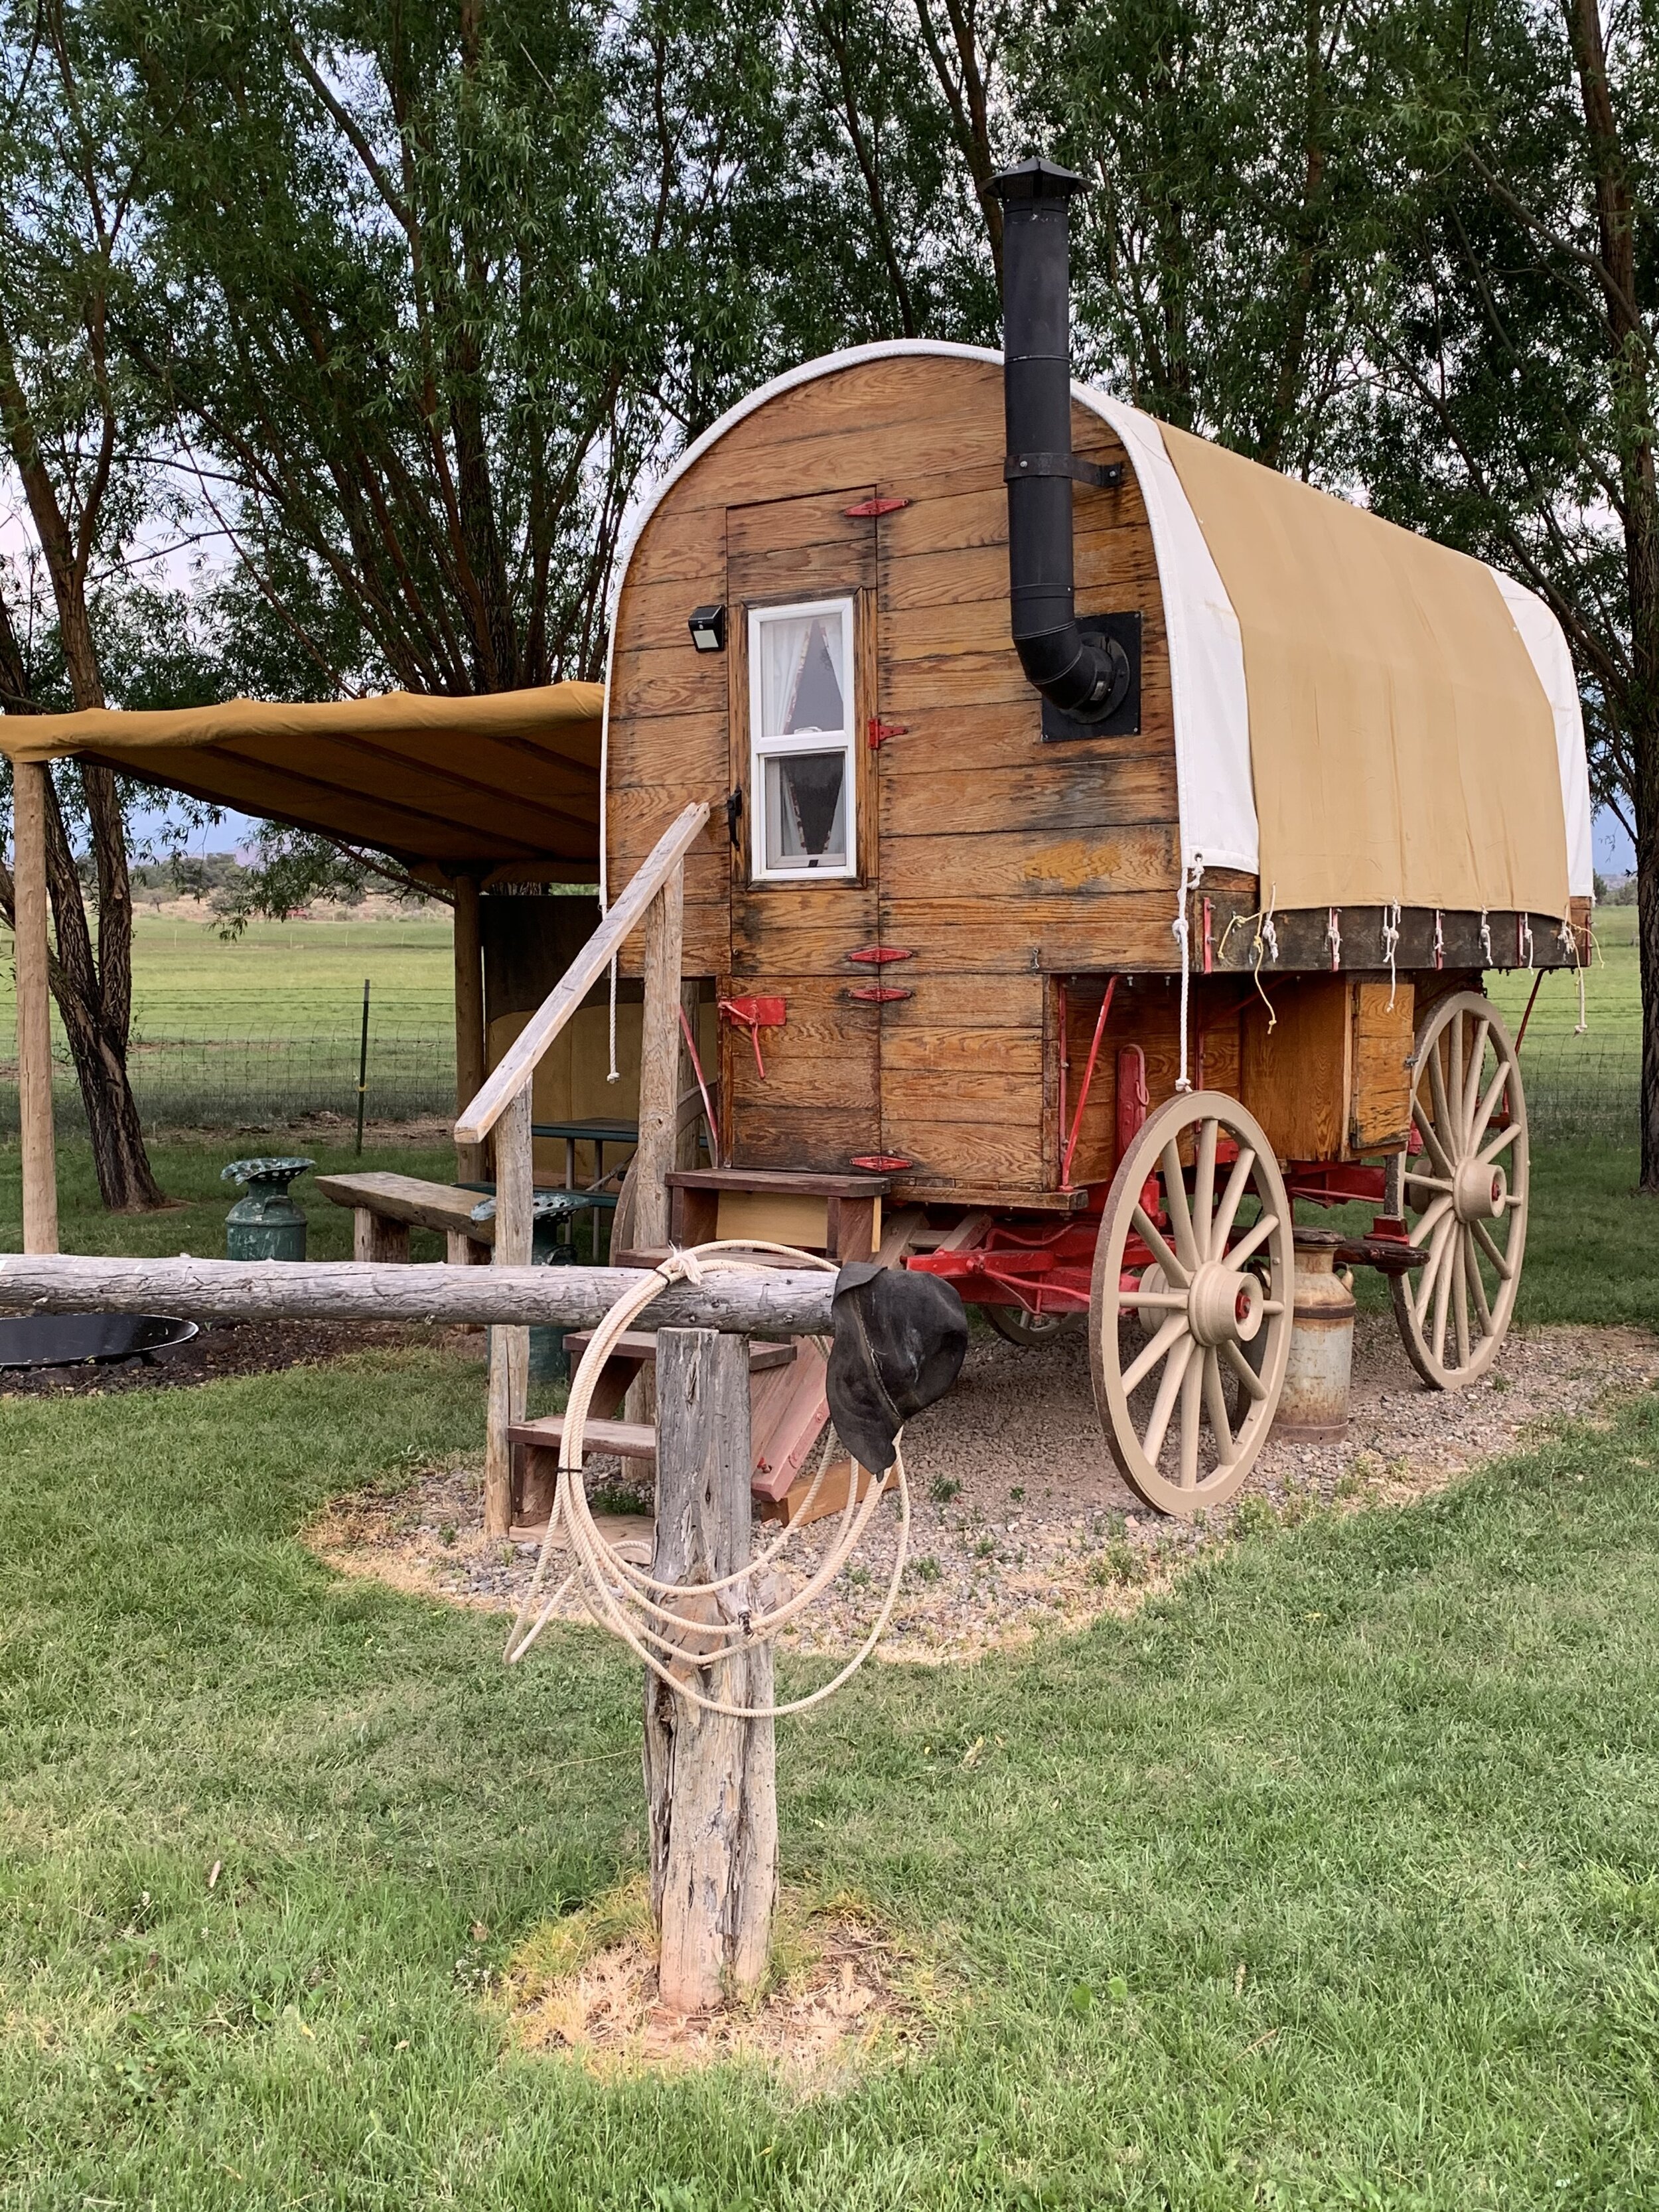  Our RV park near Capitol Reef NP displayed this model of camping-past and was named  Wonderland  in honor of the area’s history. 